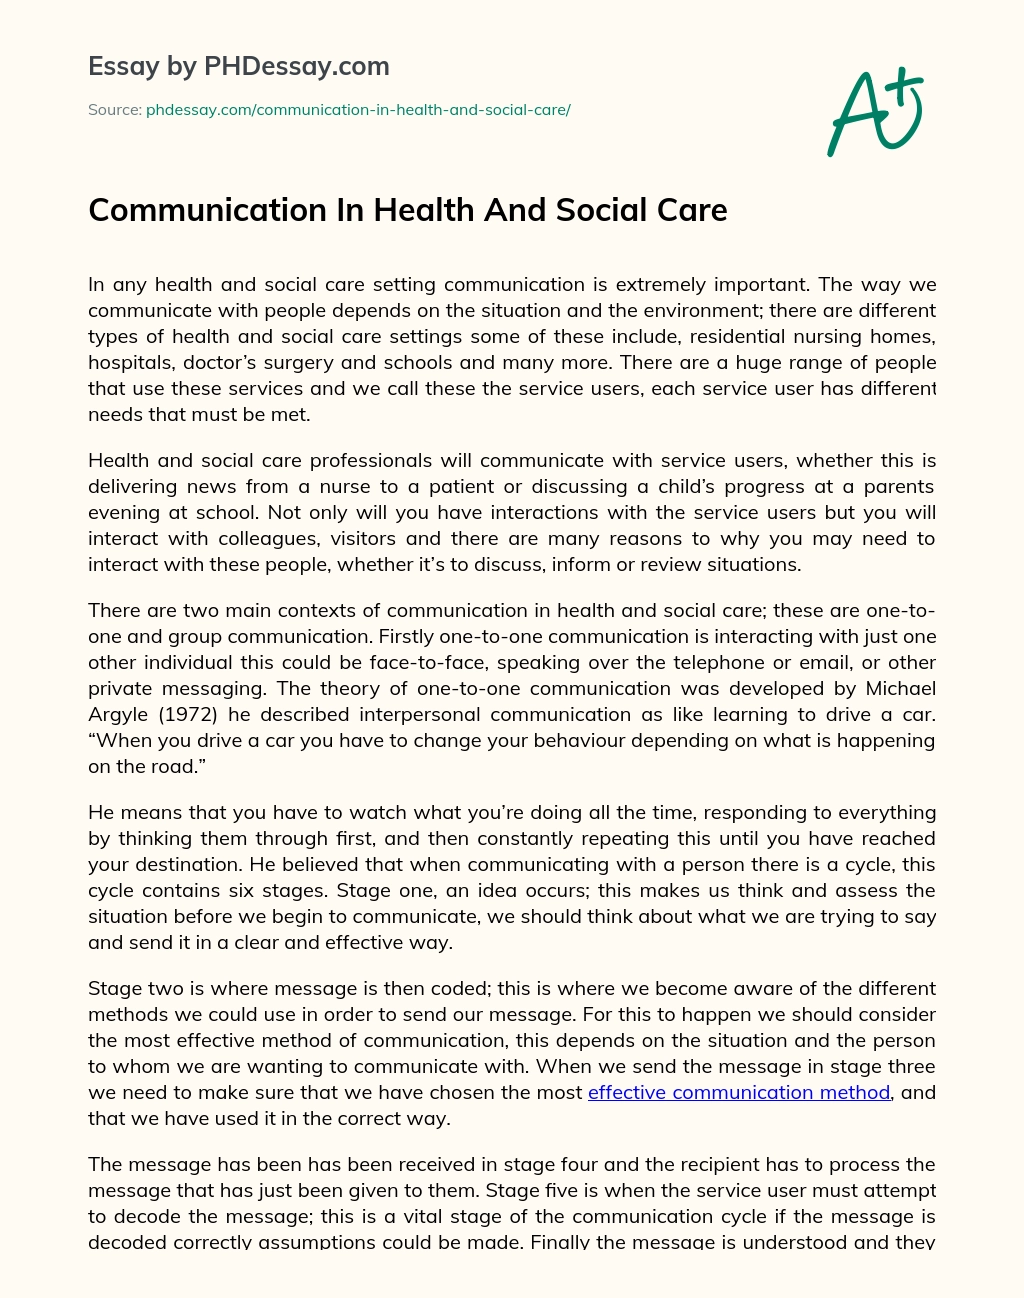 Communication In Health And Social Care essay